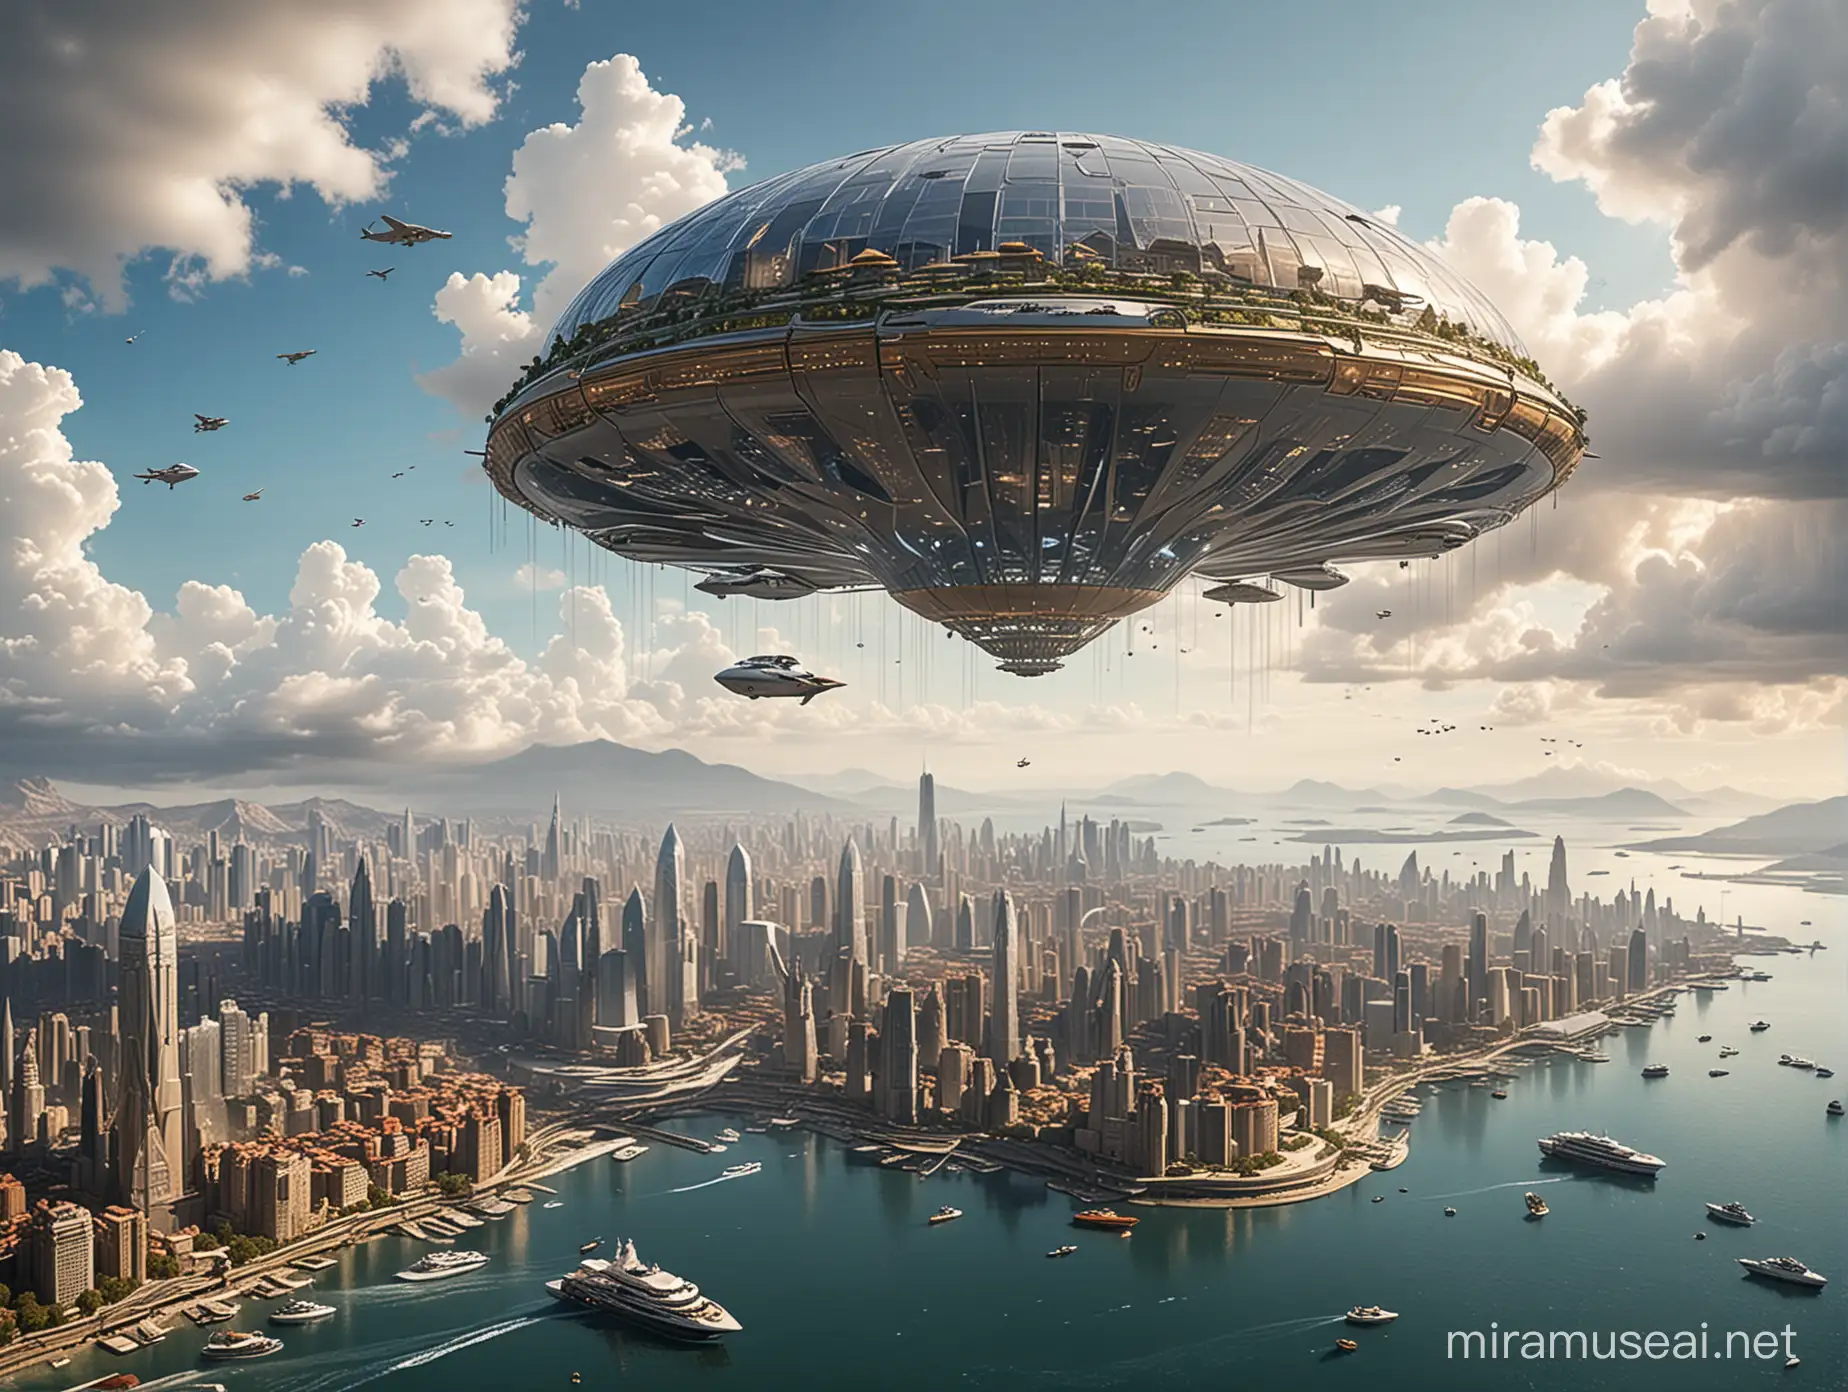 Imagine an enormous floating city suspended in mid-air, with intricate
architectural details and advanced technology, serving as a midway point for
travelers on their journeys